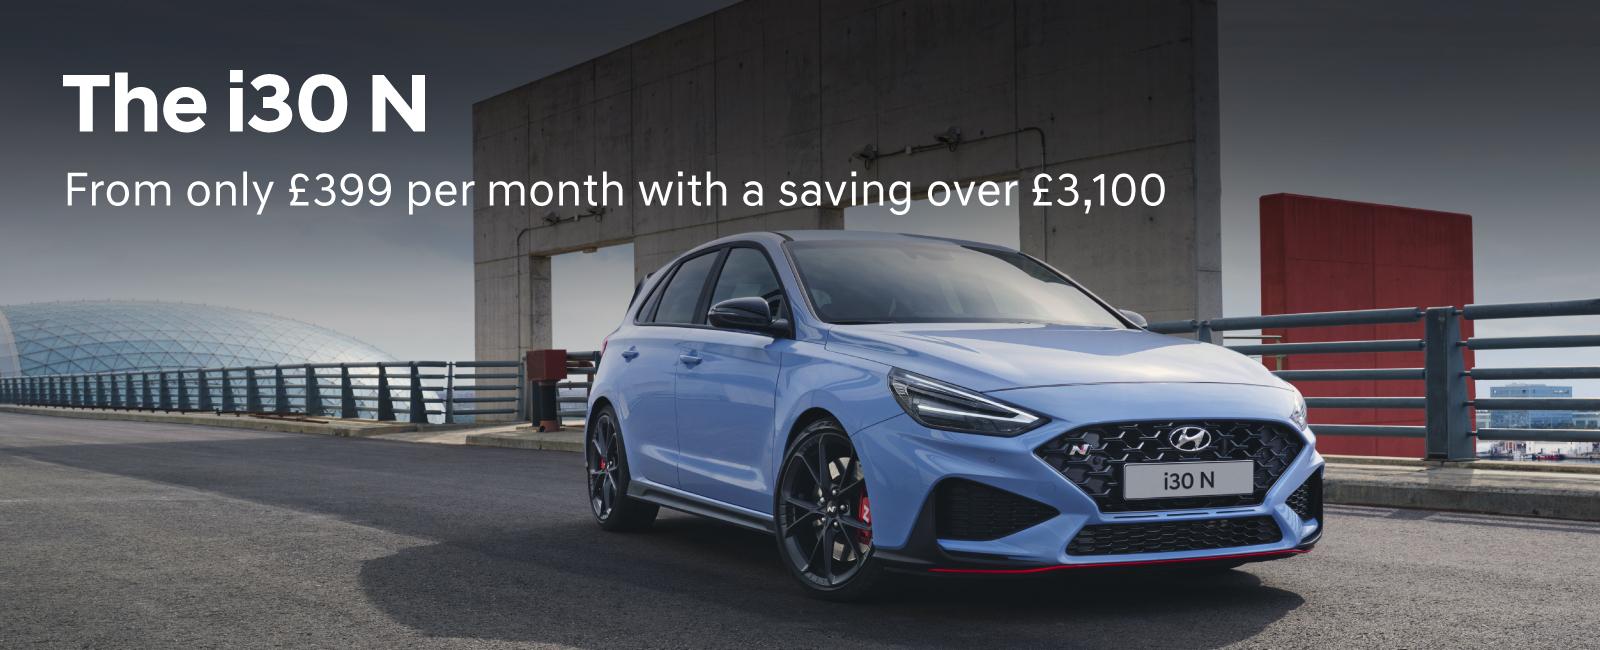 The Hyundai i30 N from only £399 per month